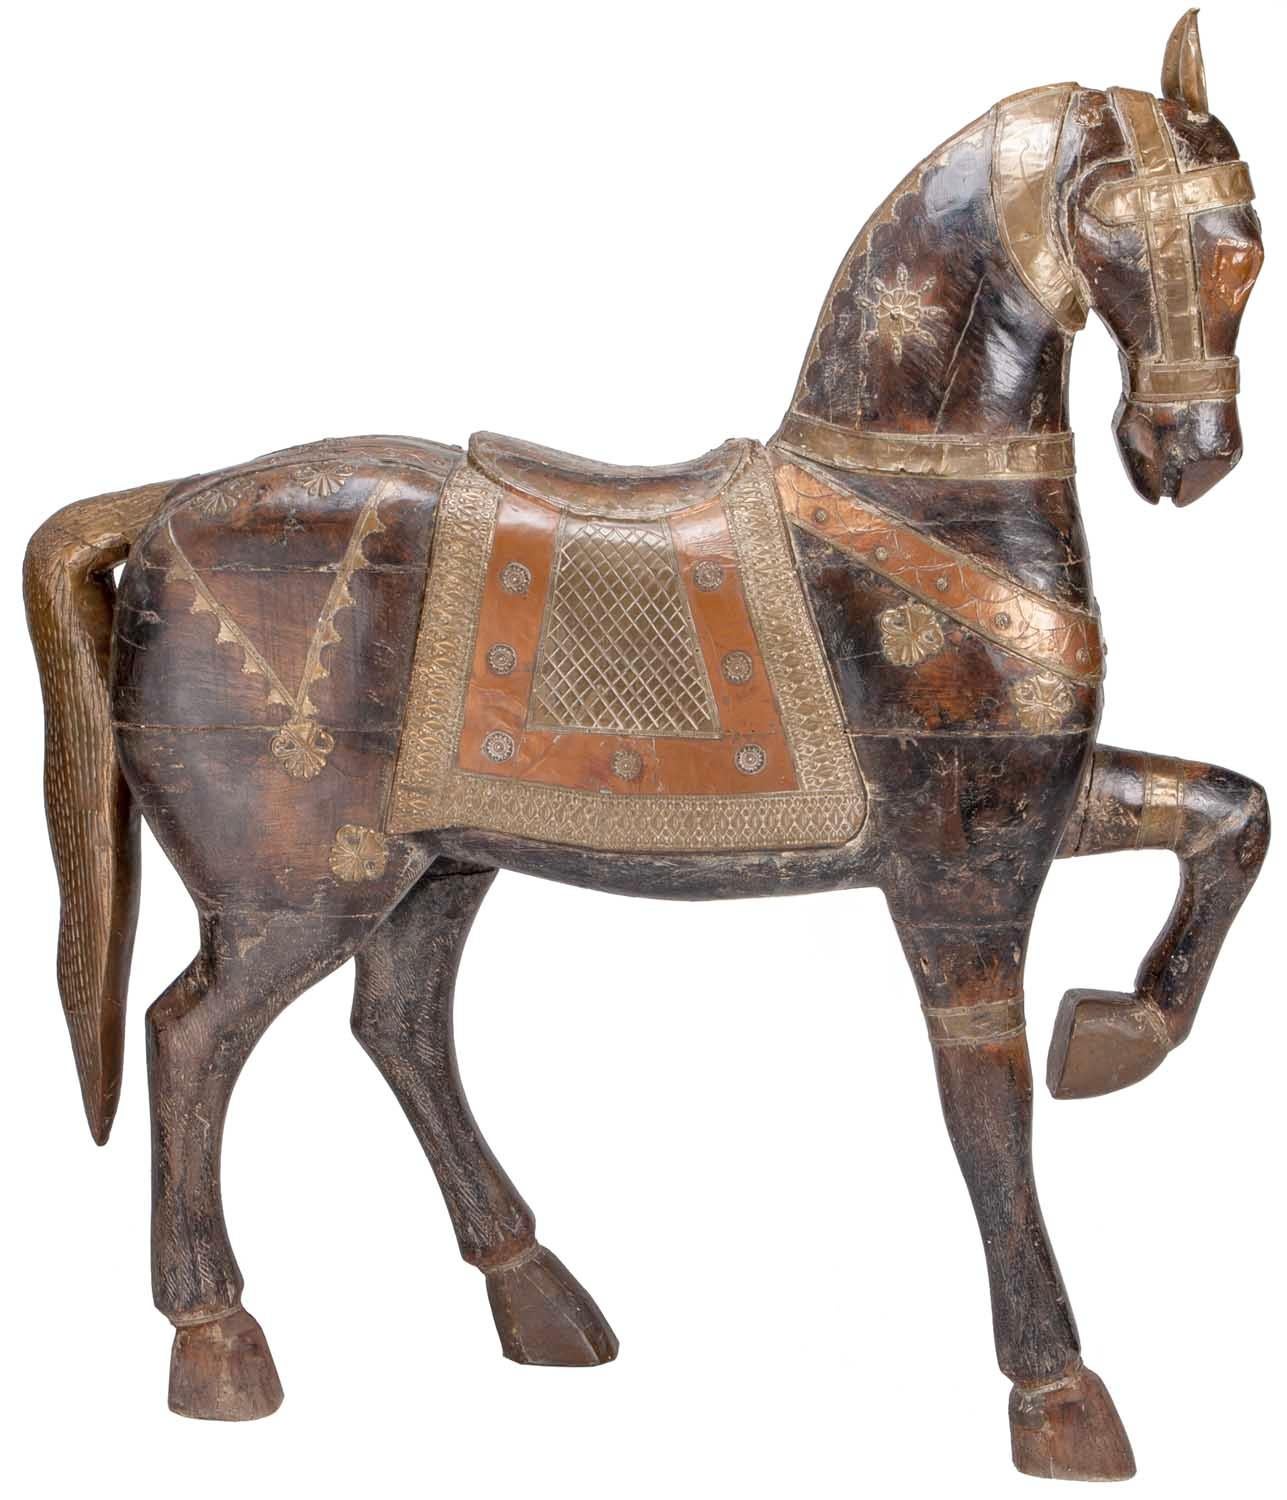 Hand carved wooden horse with brass and copper inlays.
Purchased in India, November 2019.
 